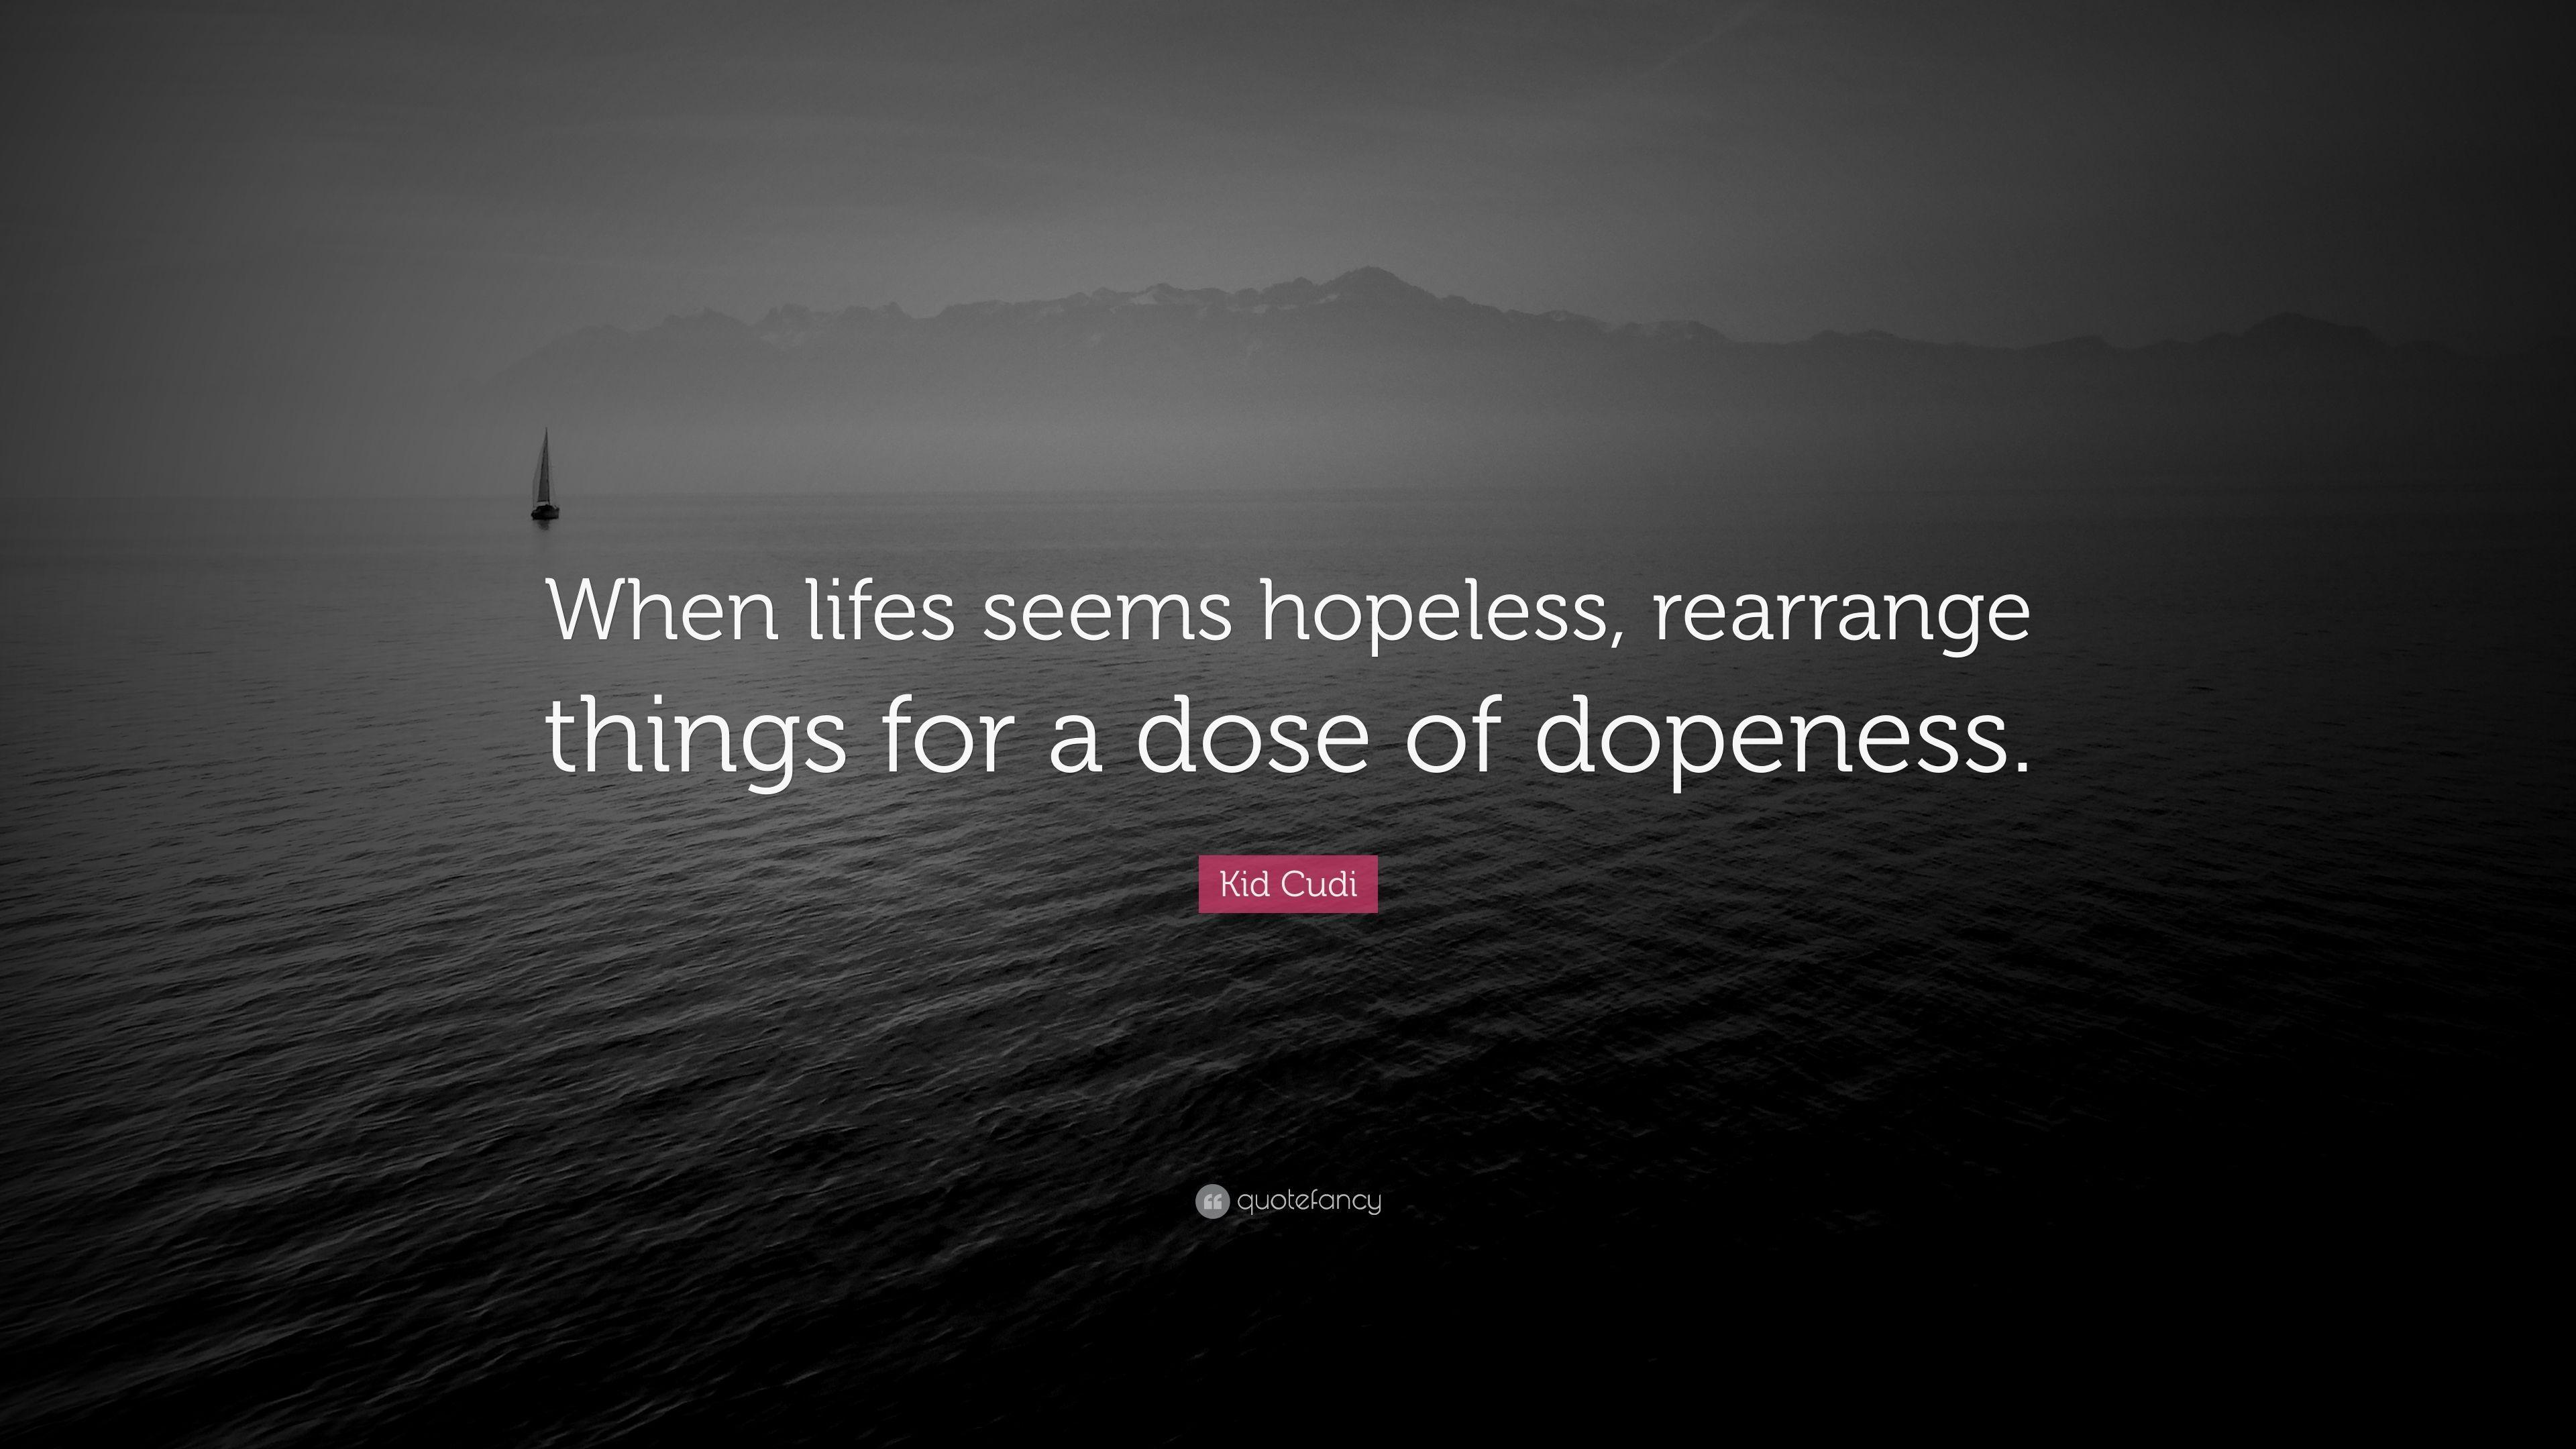 Kid Cudi Quote: “When lifes seems hopeless, rearrange things for a